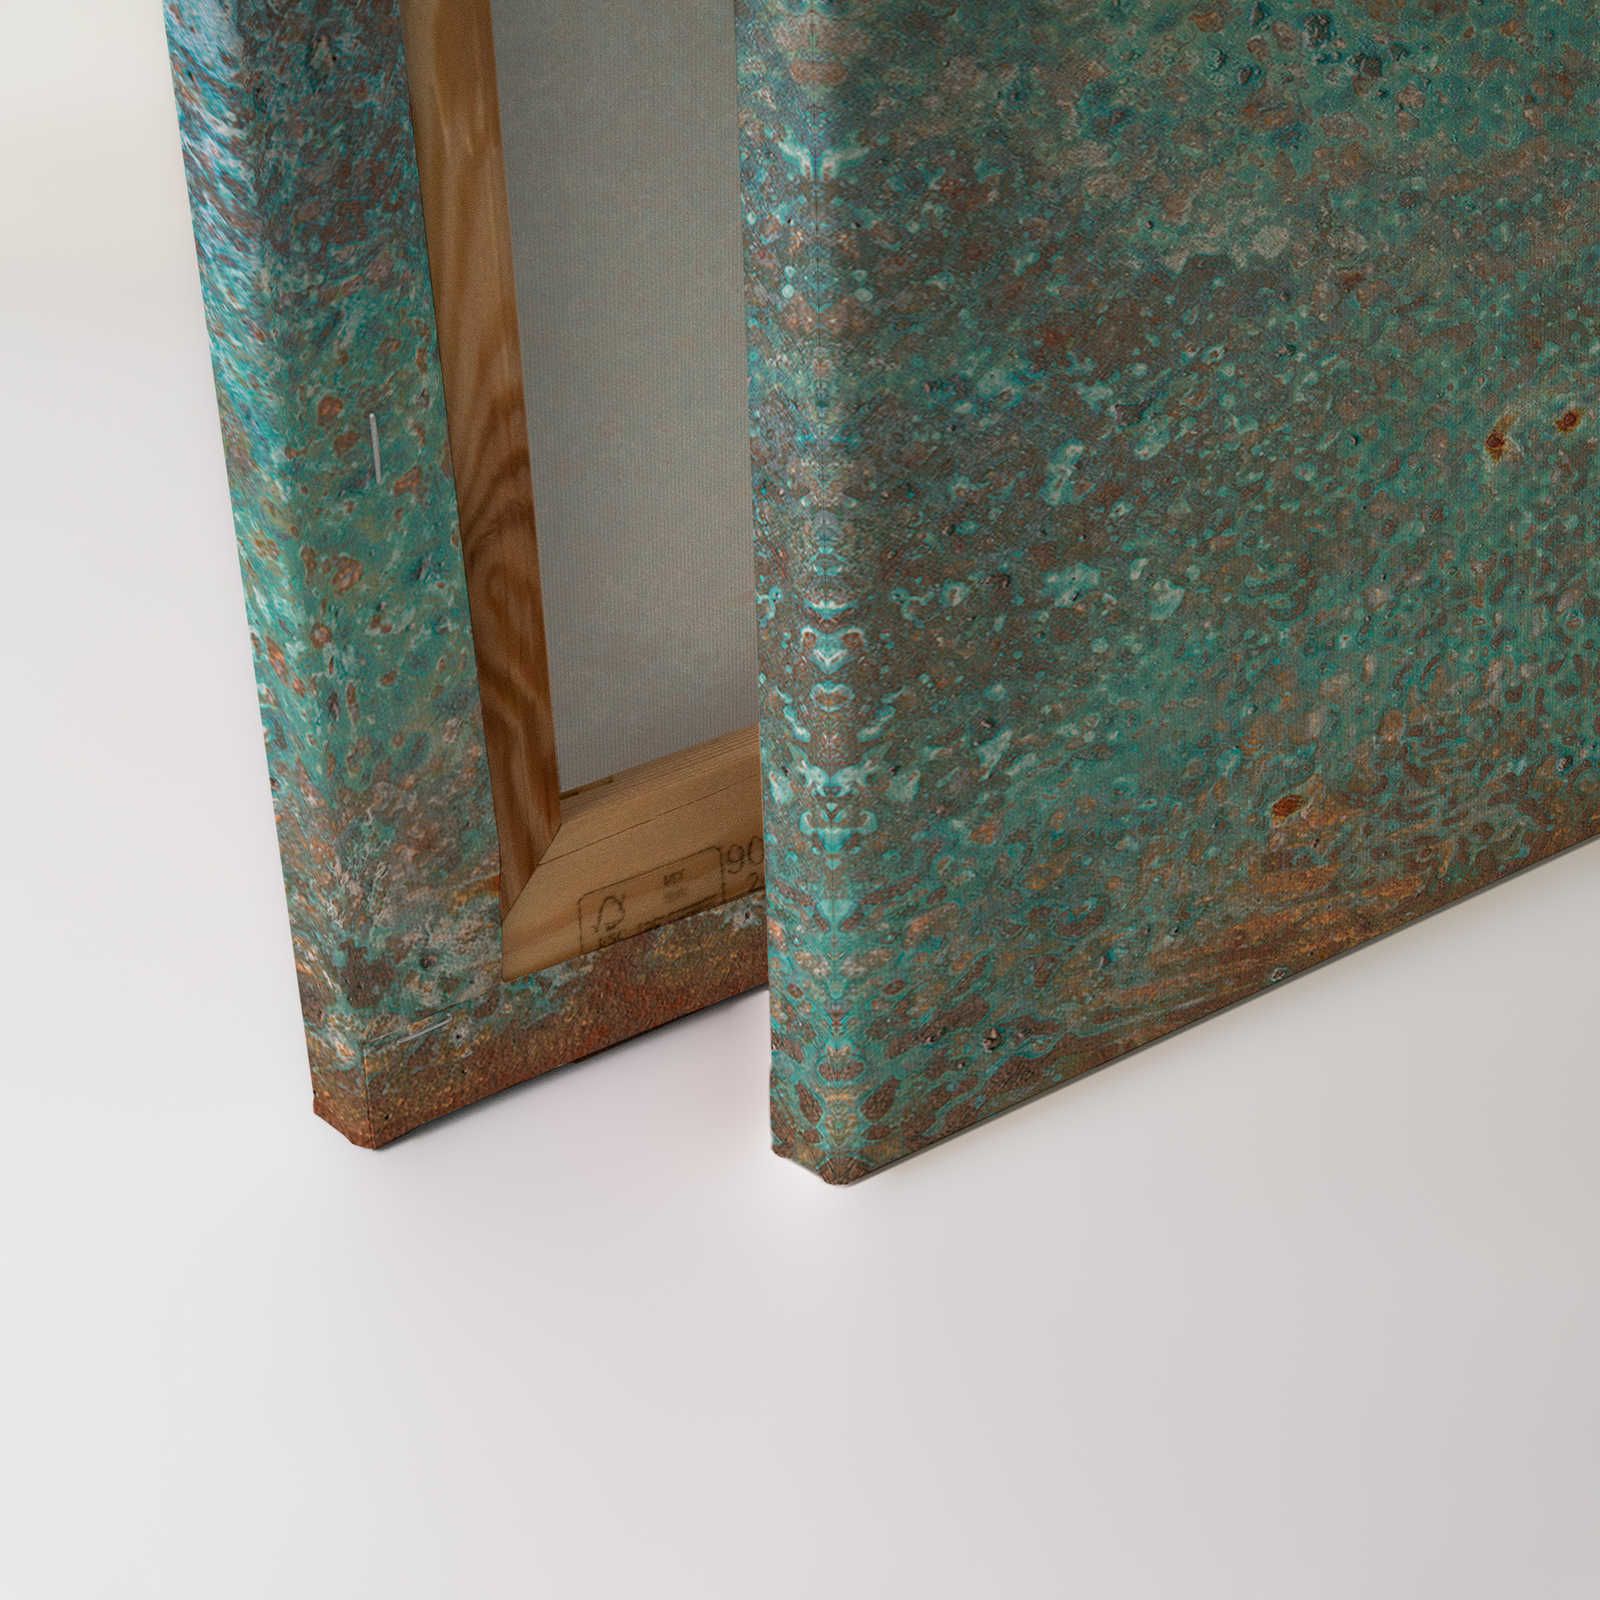             Metal Optics Canvas Painting Turquoise Patina with Rust - 0.90 m x 0.60 m
        